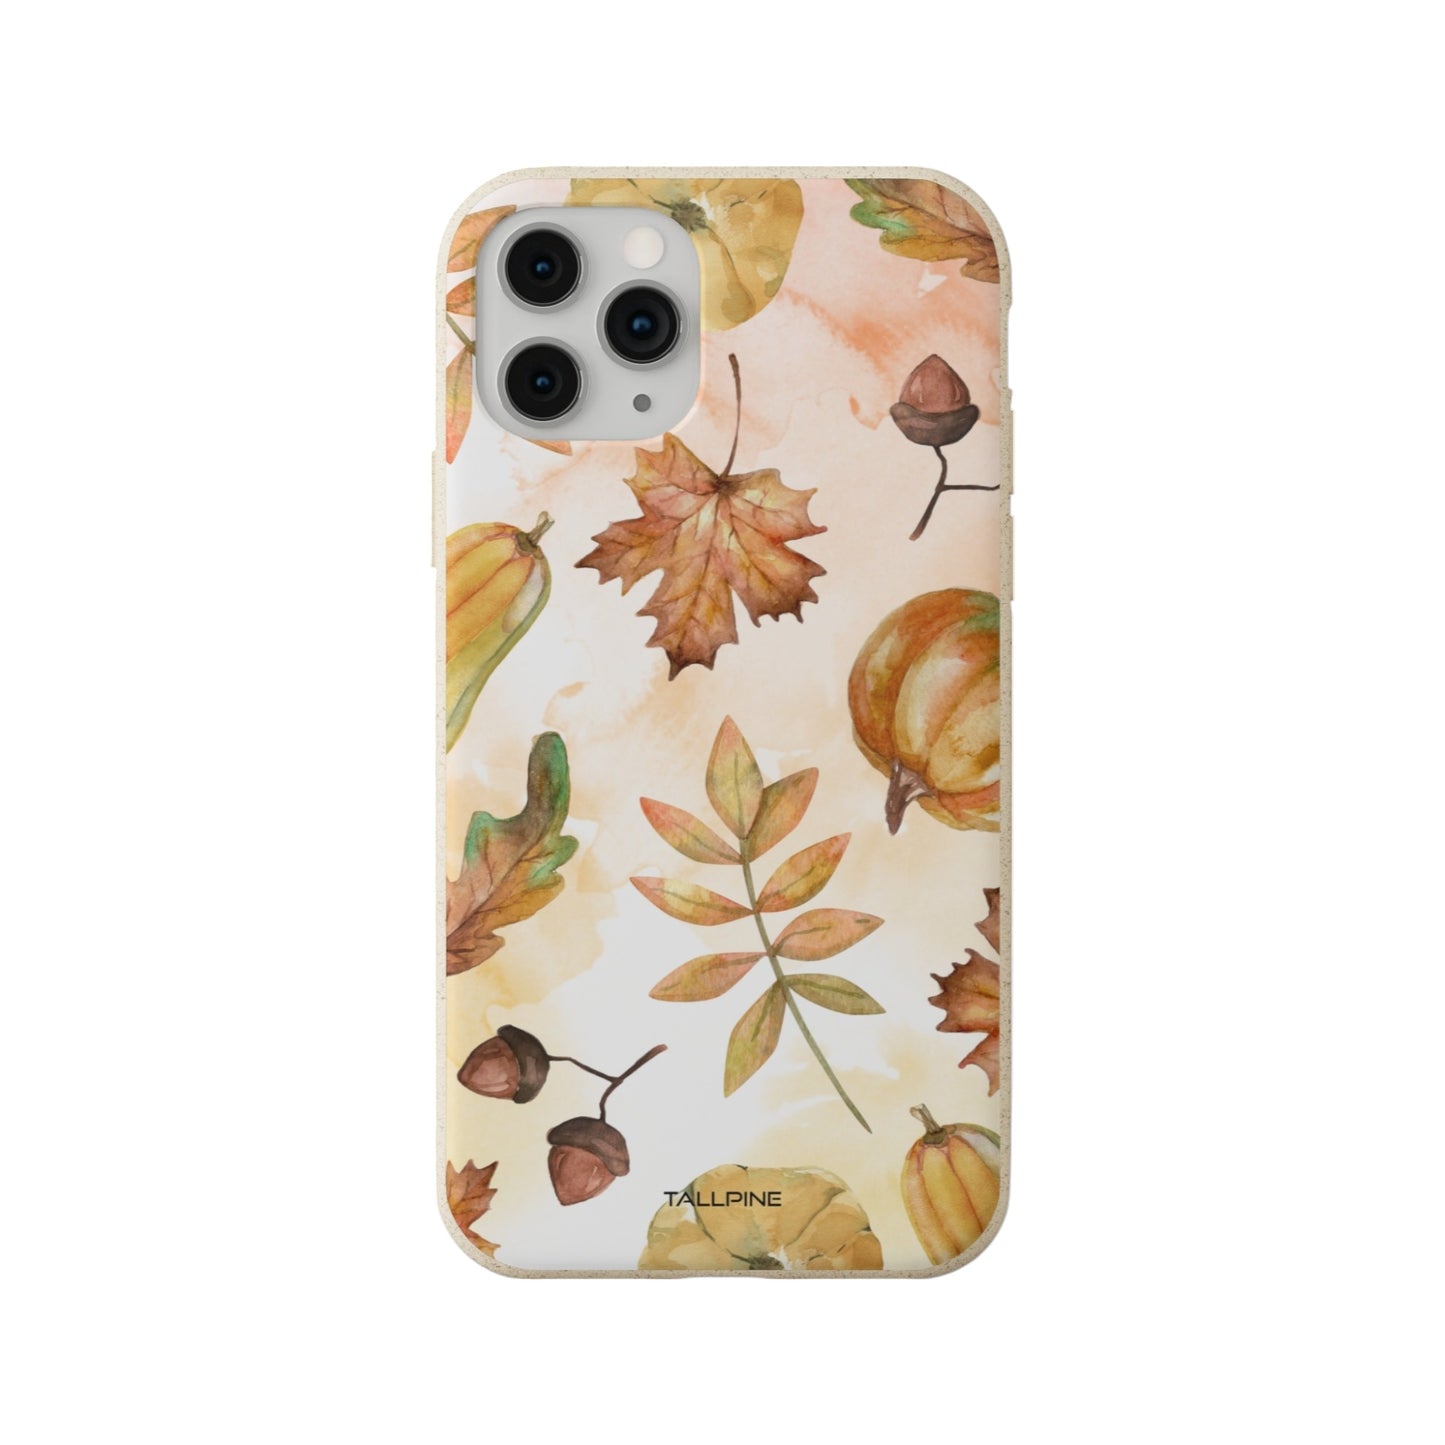 Autumn Harvest - Eco Case iPhone 11 Pro - Tallpine Cases | Sustainable and Eco-Friendly Phone Cases - autumn leaves nature New orange